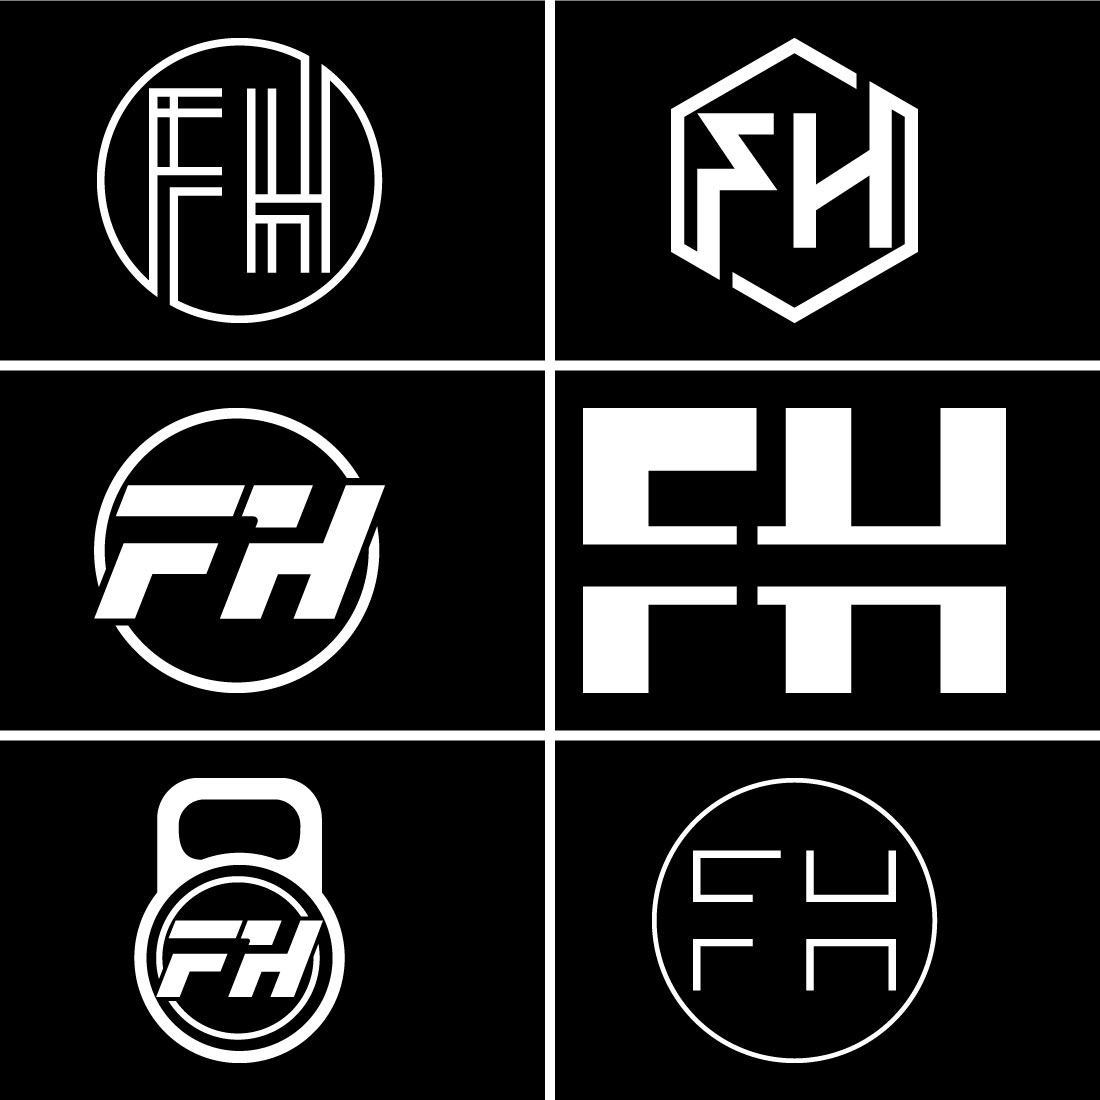 F H Logo Stock Photos and Images - 123RF